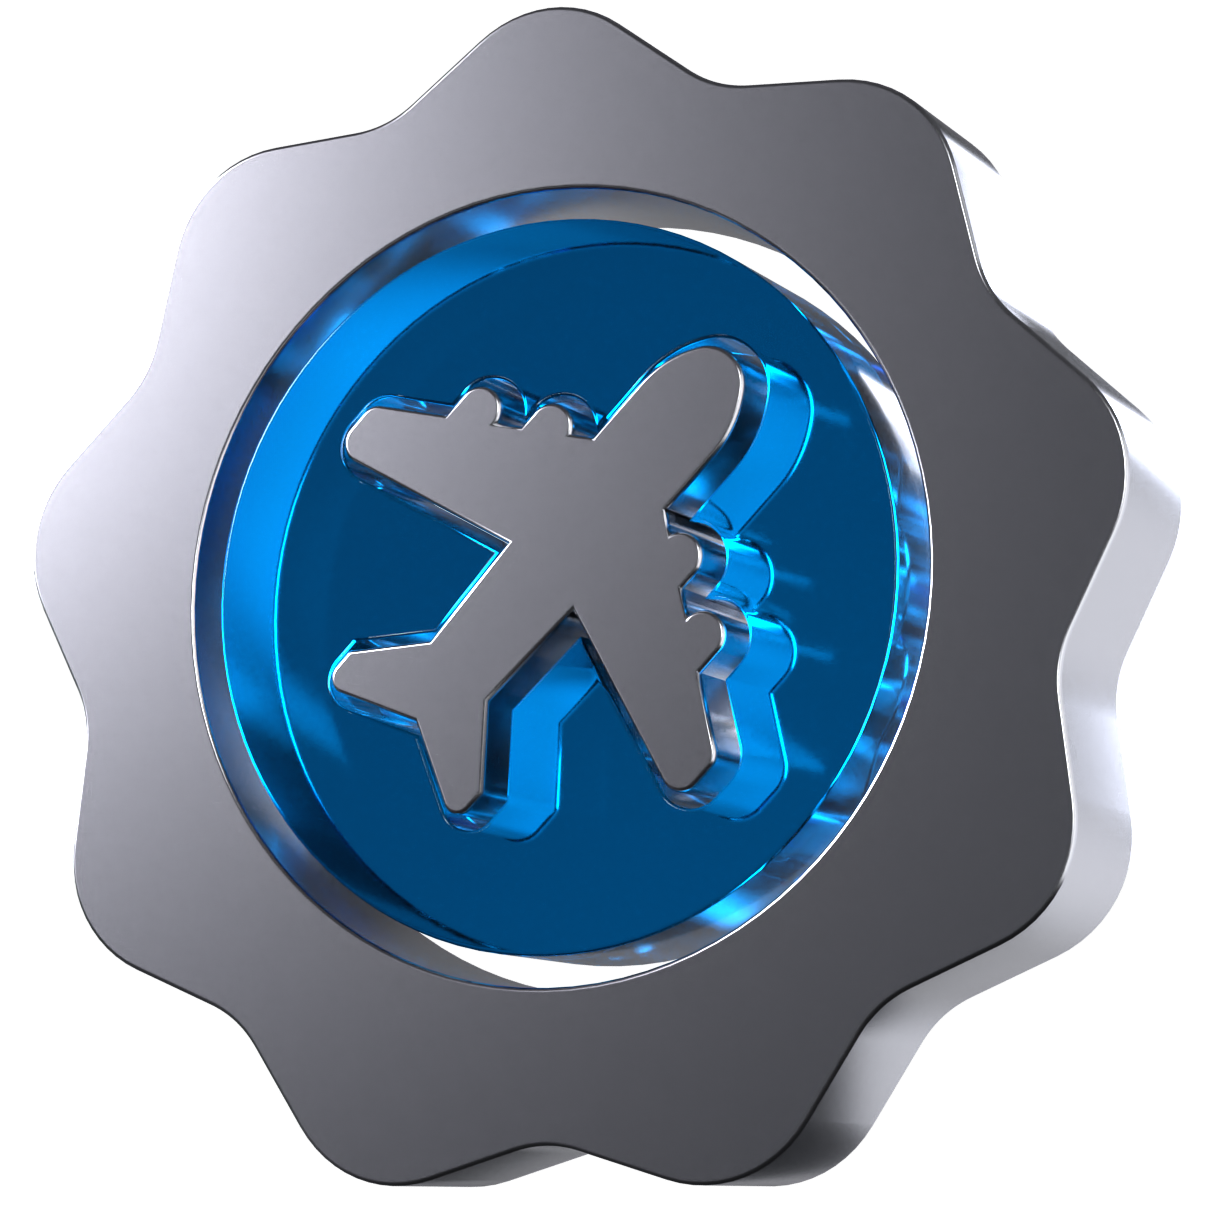 A 3D icon of a plane in a badge